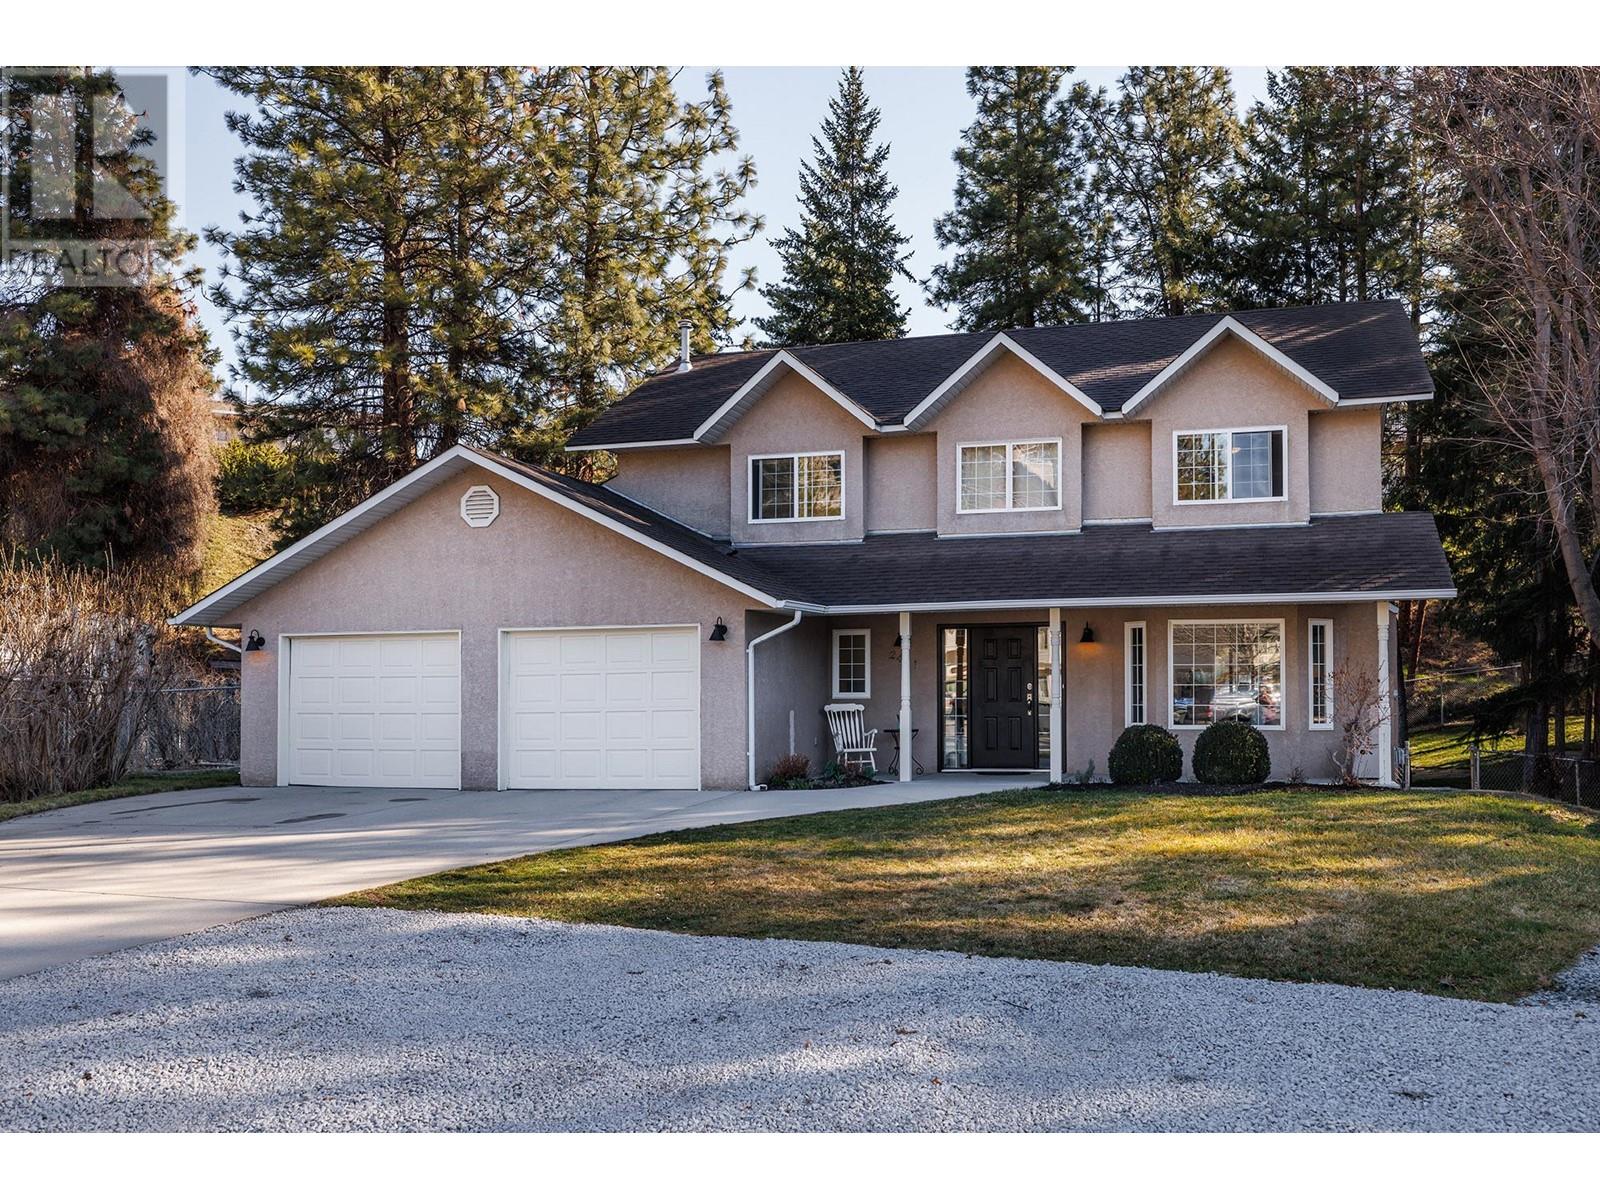 2431 Asquith Court, Shannon Lake, West Kelowna 